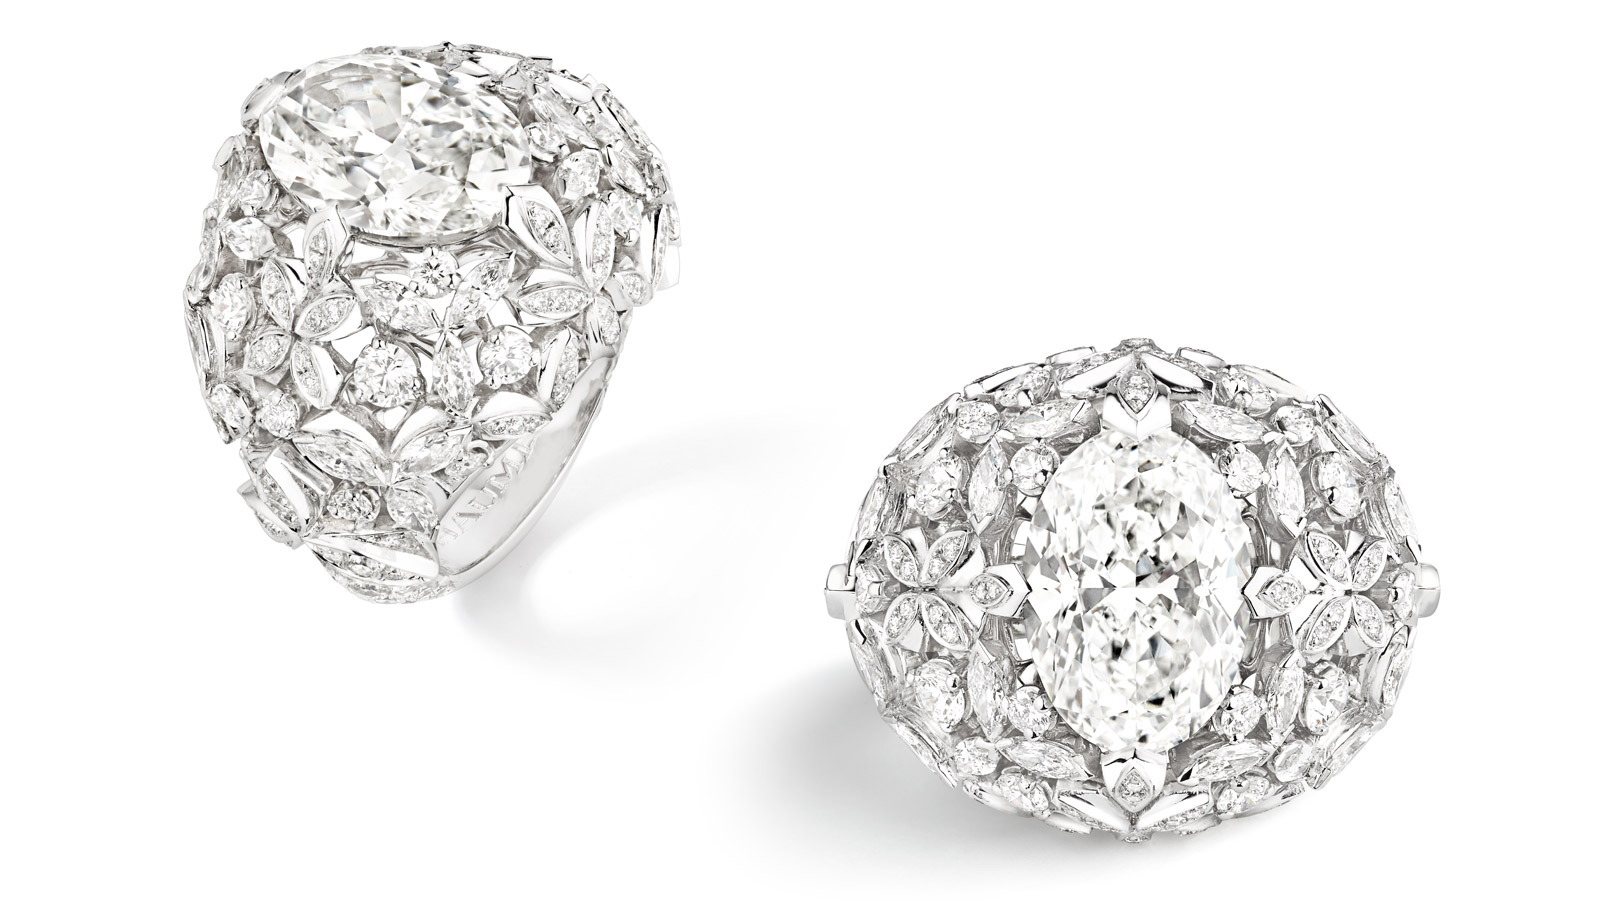 Chaumet ‘Promenades Imperiales’ ring in 18k white gold, with a 5.82 ct oval cut diamond, and diamond accents